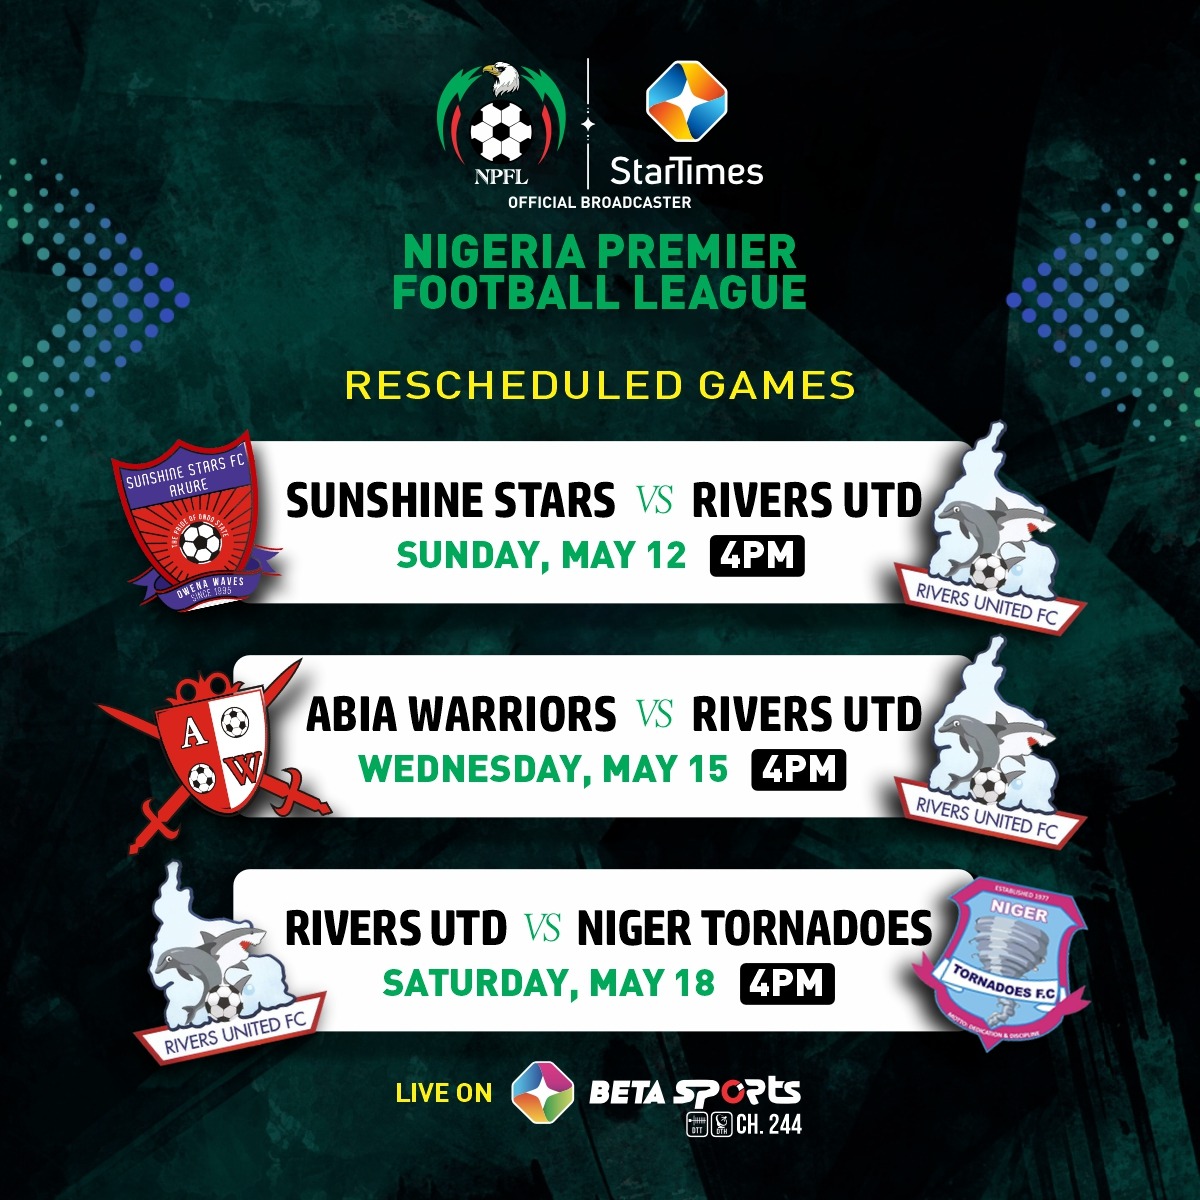 🚨🚨🚨

The remaining rescheduled games for Rivers United will be live on StarTimes. 

You do NOT want to miss the action in the Nigeria Premier Football League NPFL showing on Beta Sports Channel 244.

#NPFL 
#NPFL24
#betasports 
#StarTimesSports